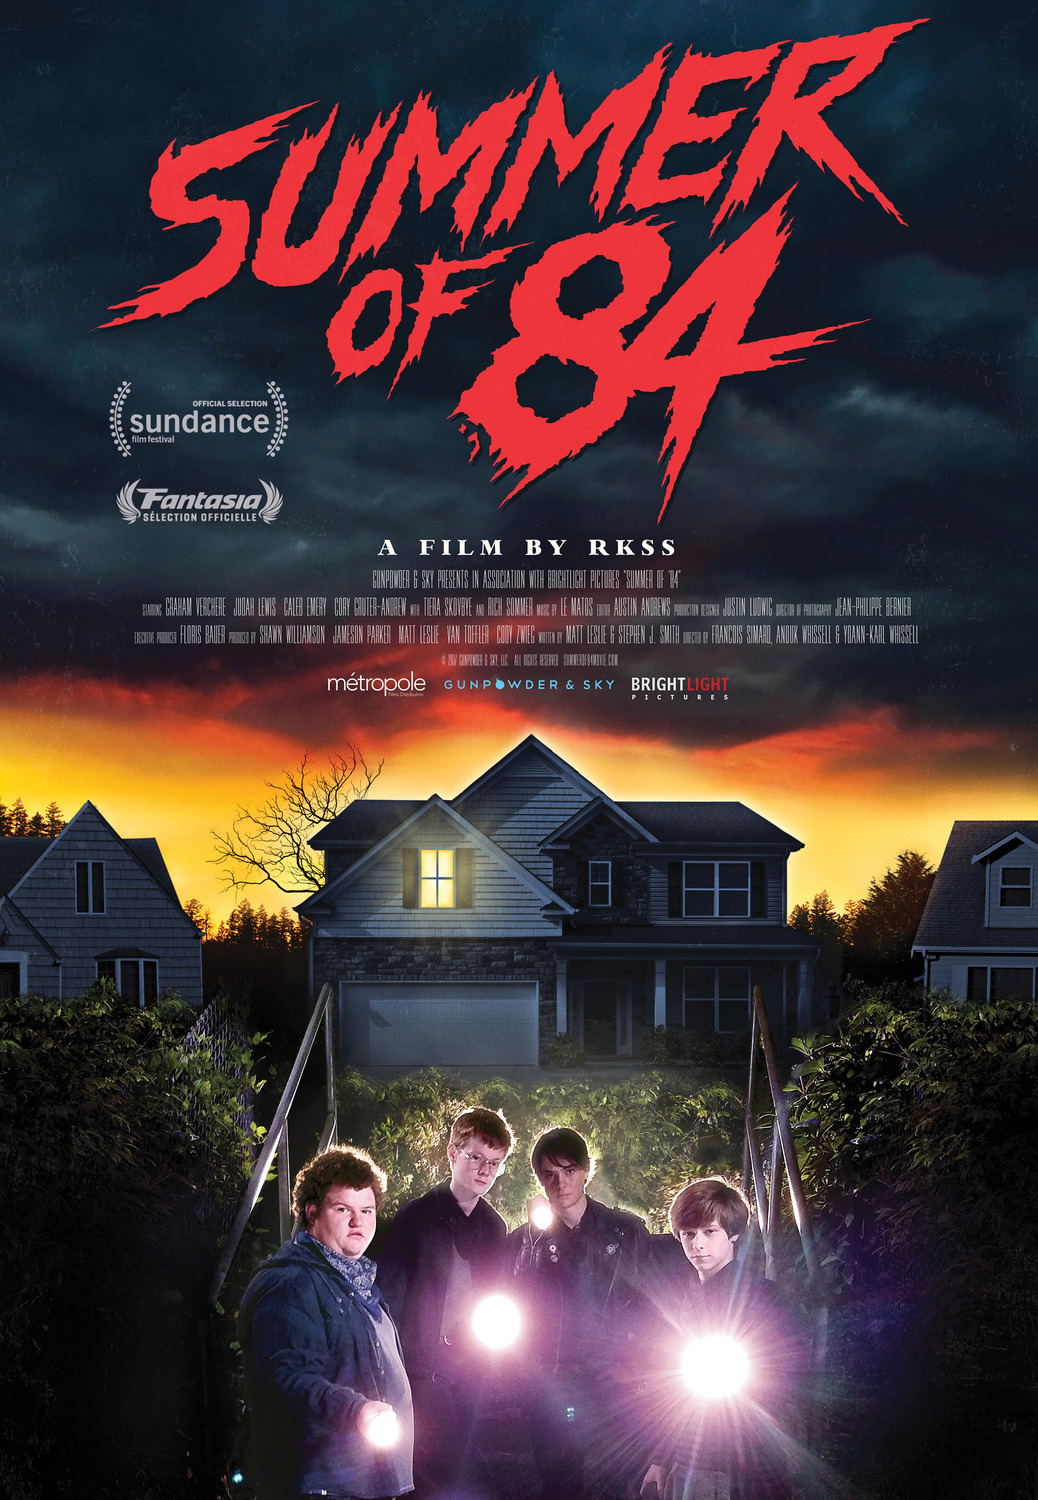 Summer of '84 - Available as a download or stream?